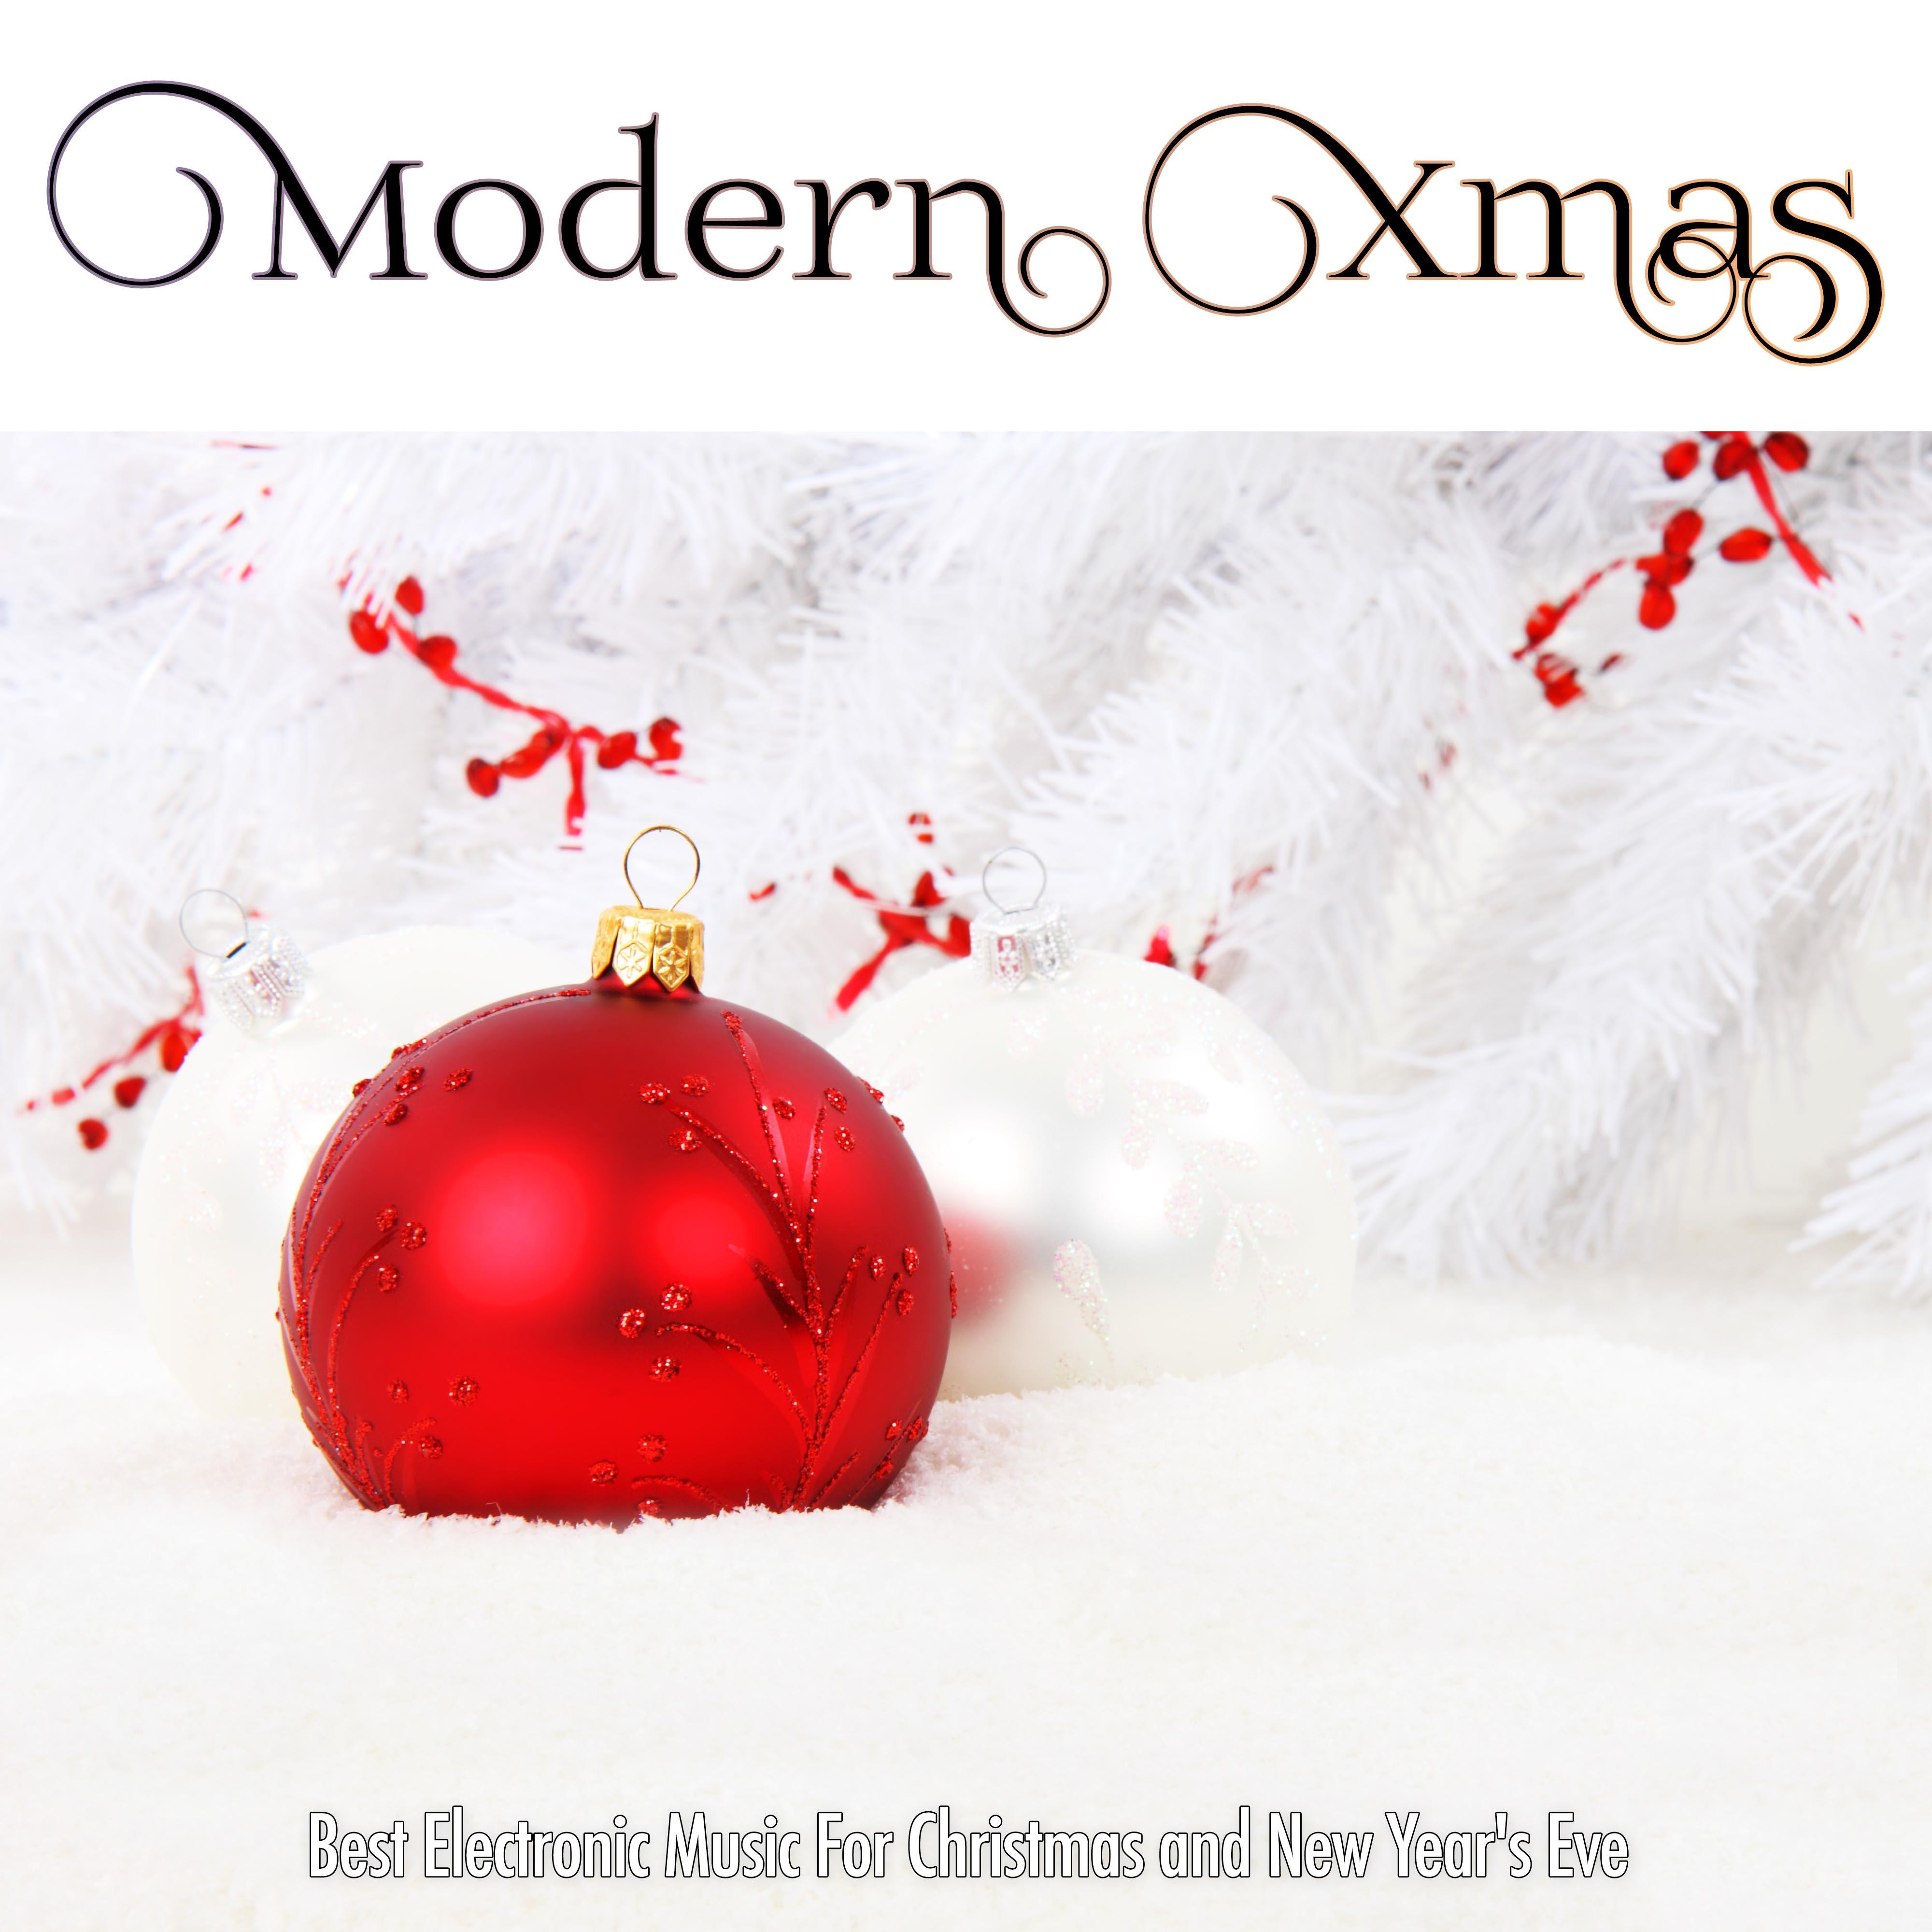 Modern Xmas- Best Electronic Music For Christmas and New Year's Eve